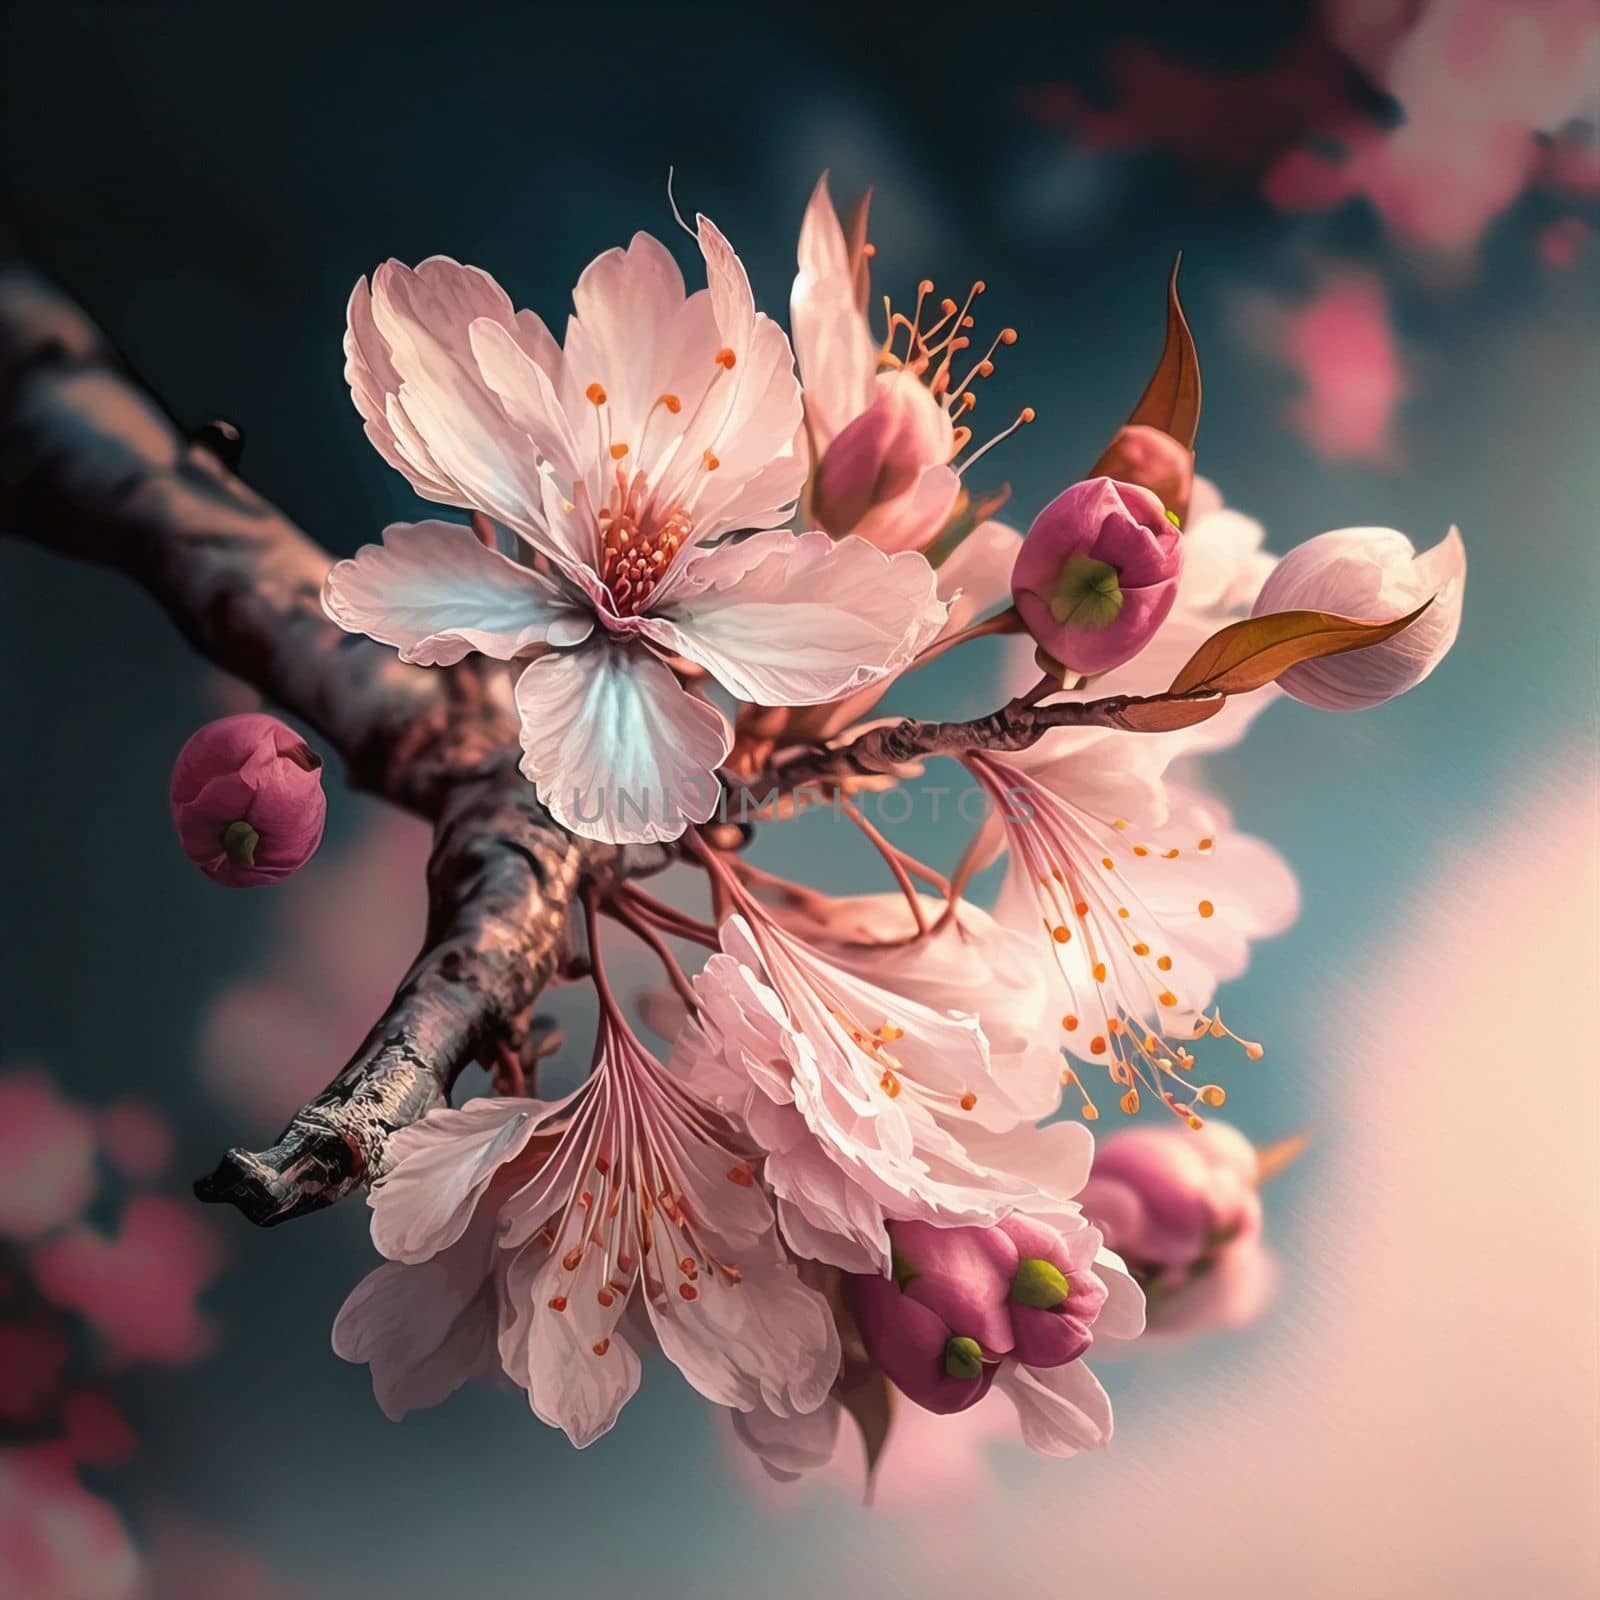 Spring background with pink blossom. Beautiful nature scene with blooming tree. download image